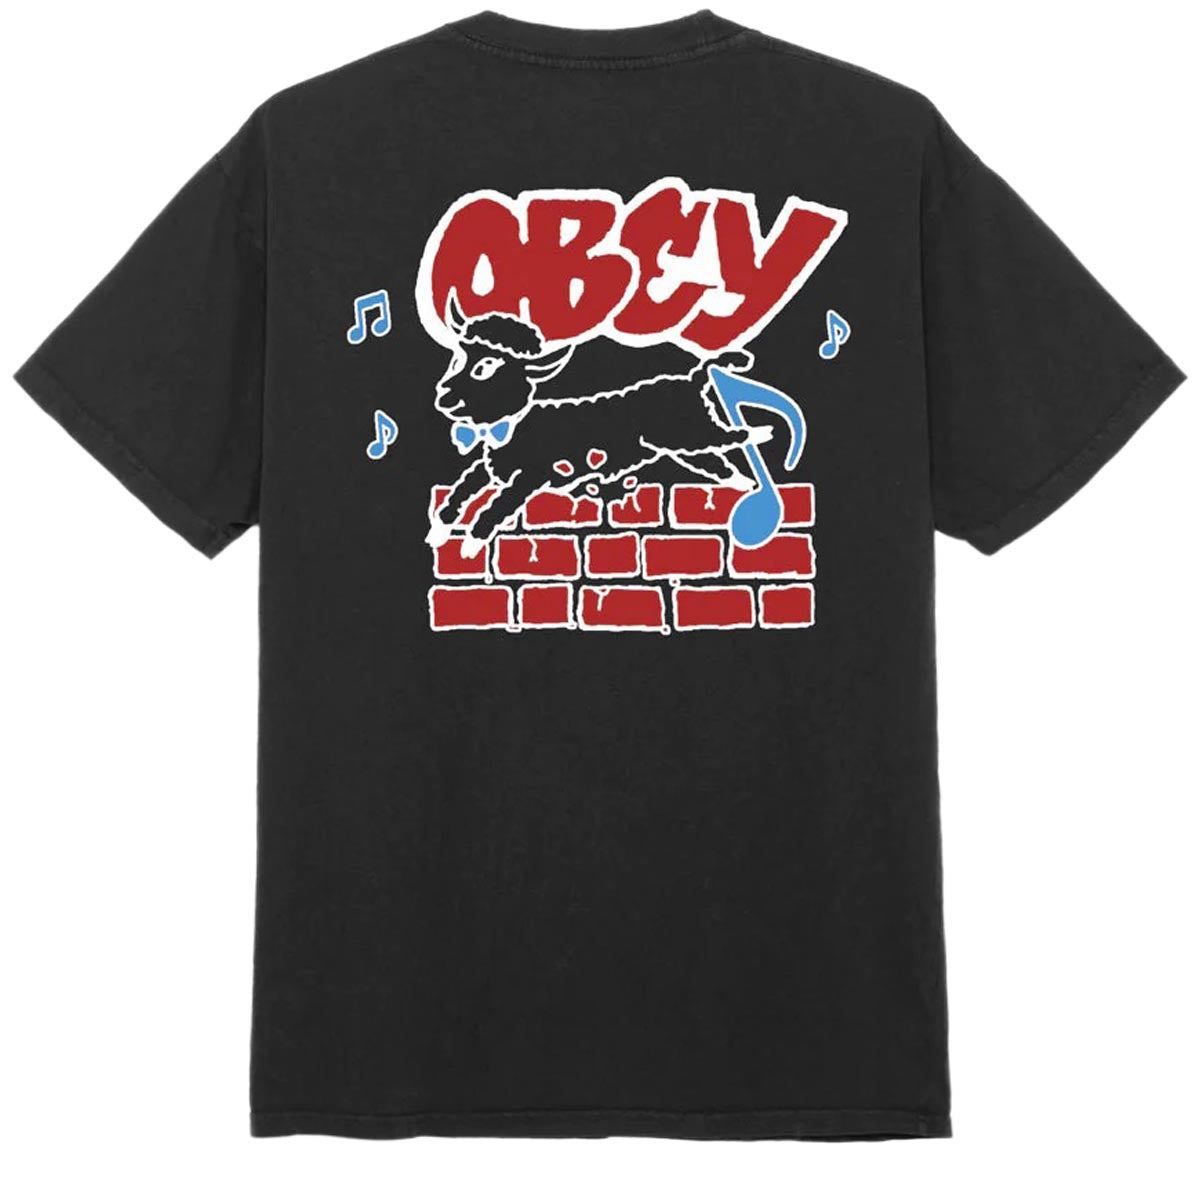 Obey Out of Step T-Shirt - Pigment Vintage Black